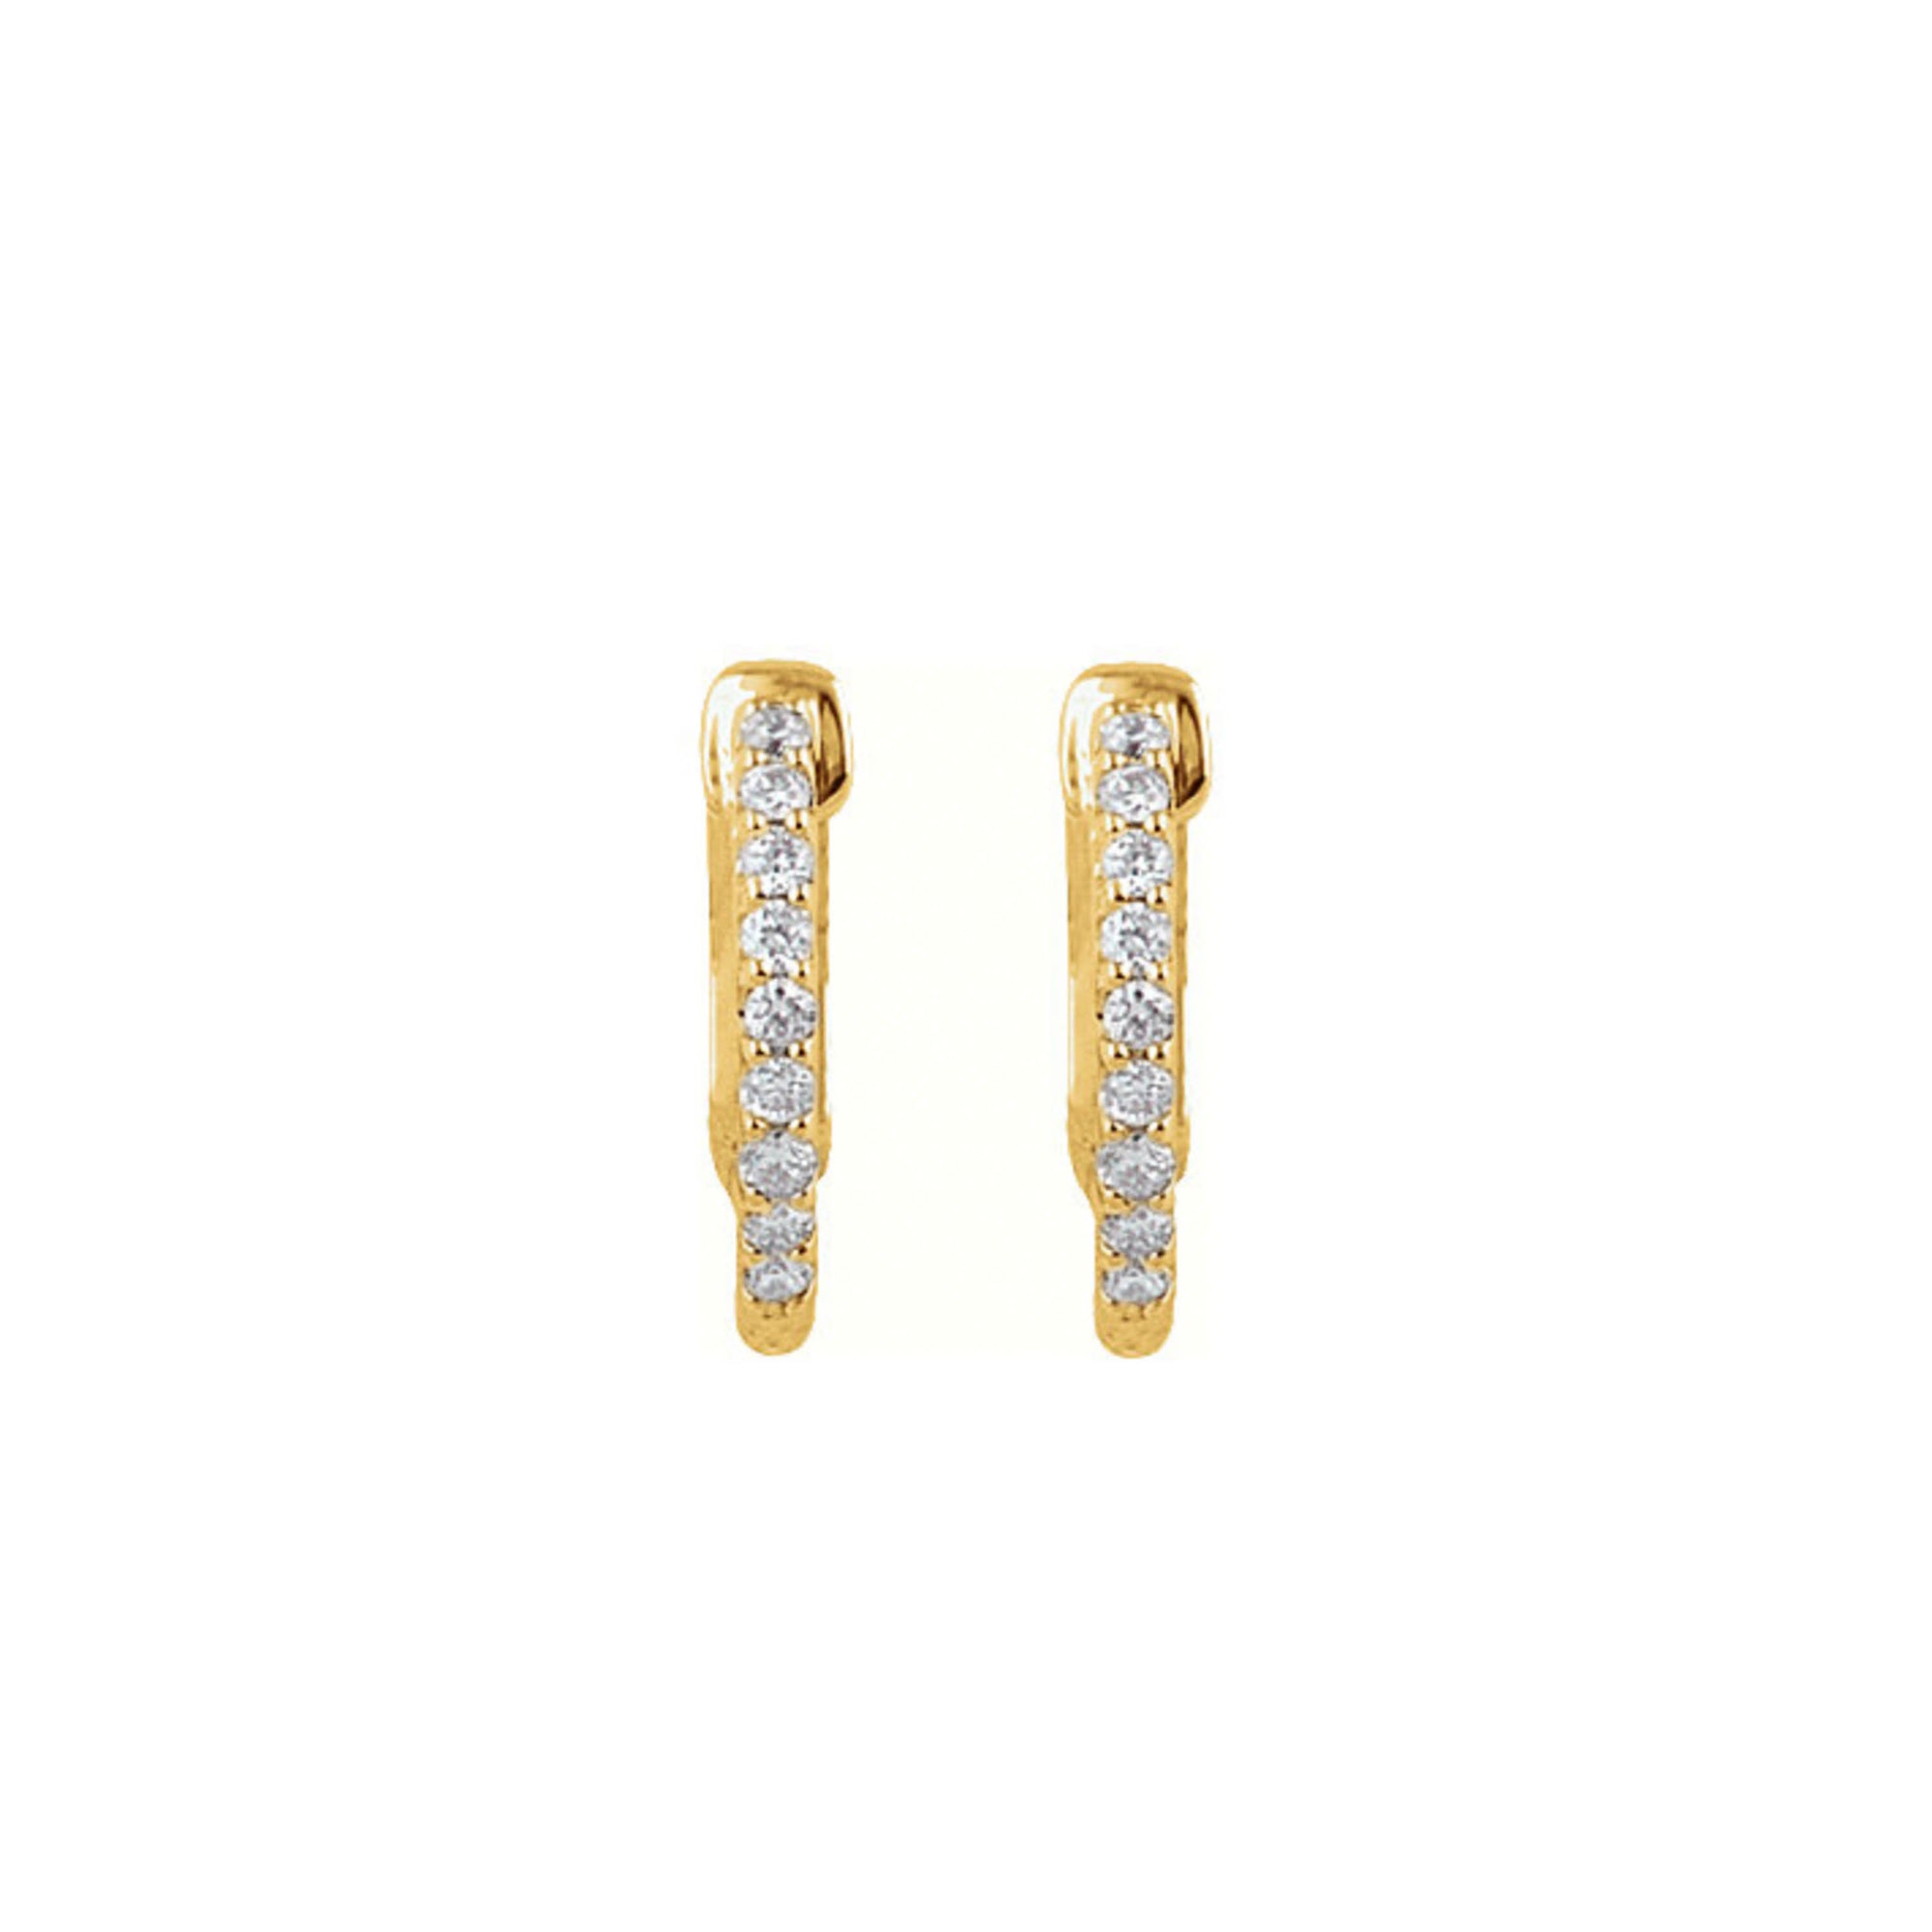 Diamond Earring Hoops, 0.25 Carat Total Weight in 14k White, Yellow or Rose Gold - Talisman Collection Fine Jewelers